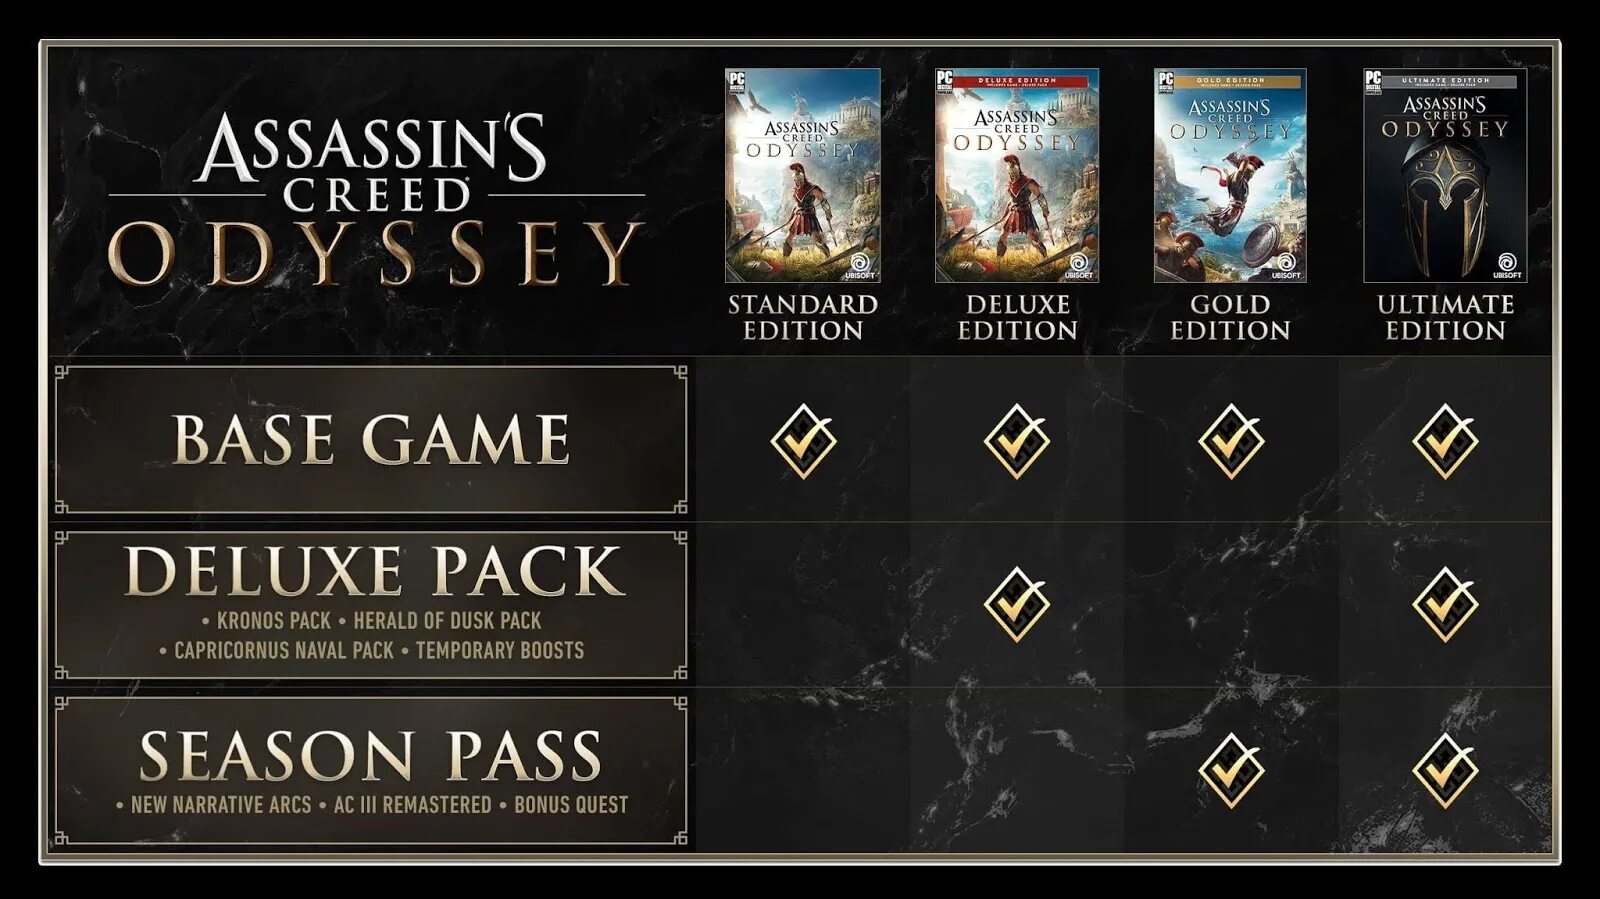 Assassin's Creed® Odyssey - Gold Edition. Odyssey ps4 Gold Edition. Assassin's Creed Odyssey Ultimate Edition Xbox. Assassin's Creed Odyssey ps4. Assassin s creed odyssey editions